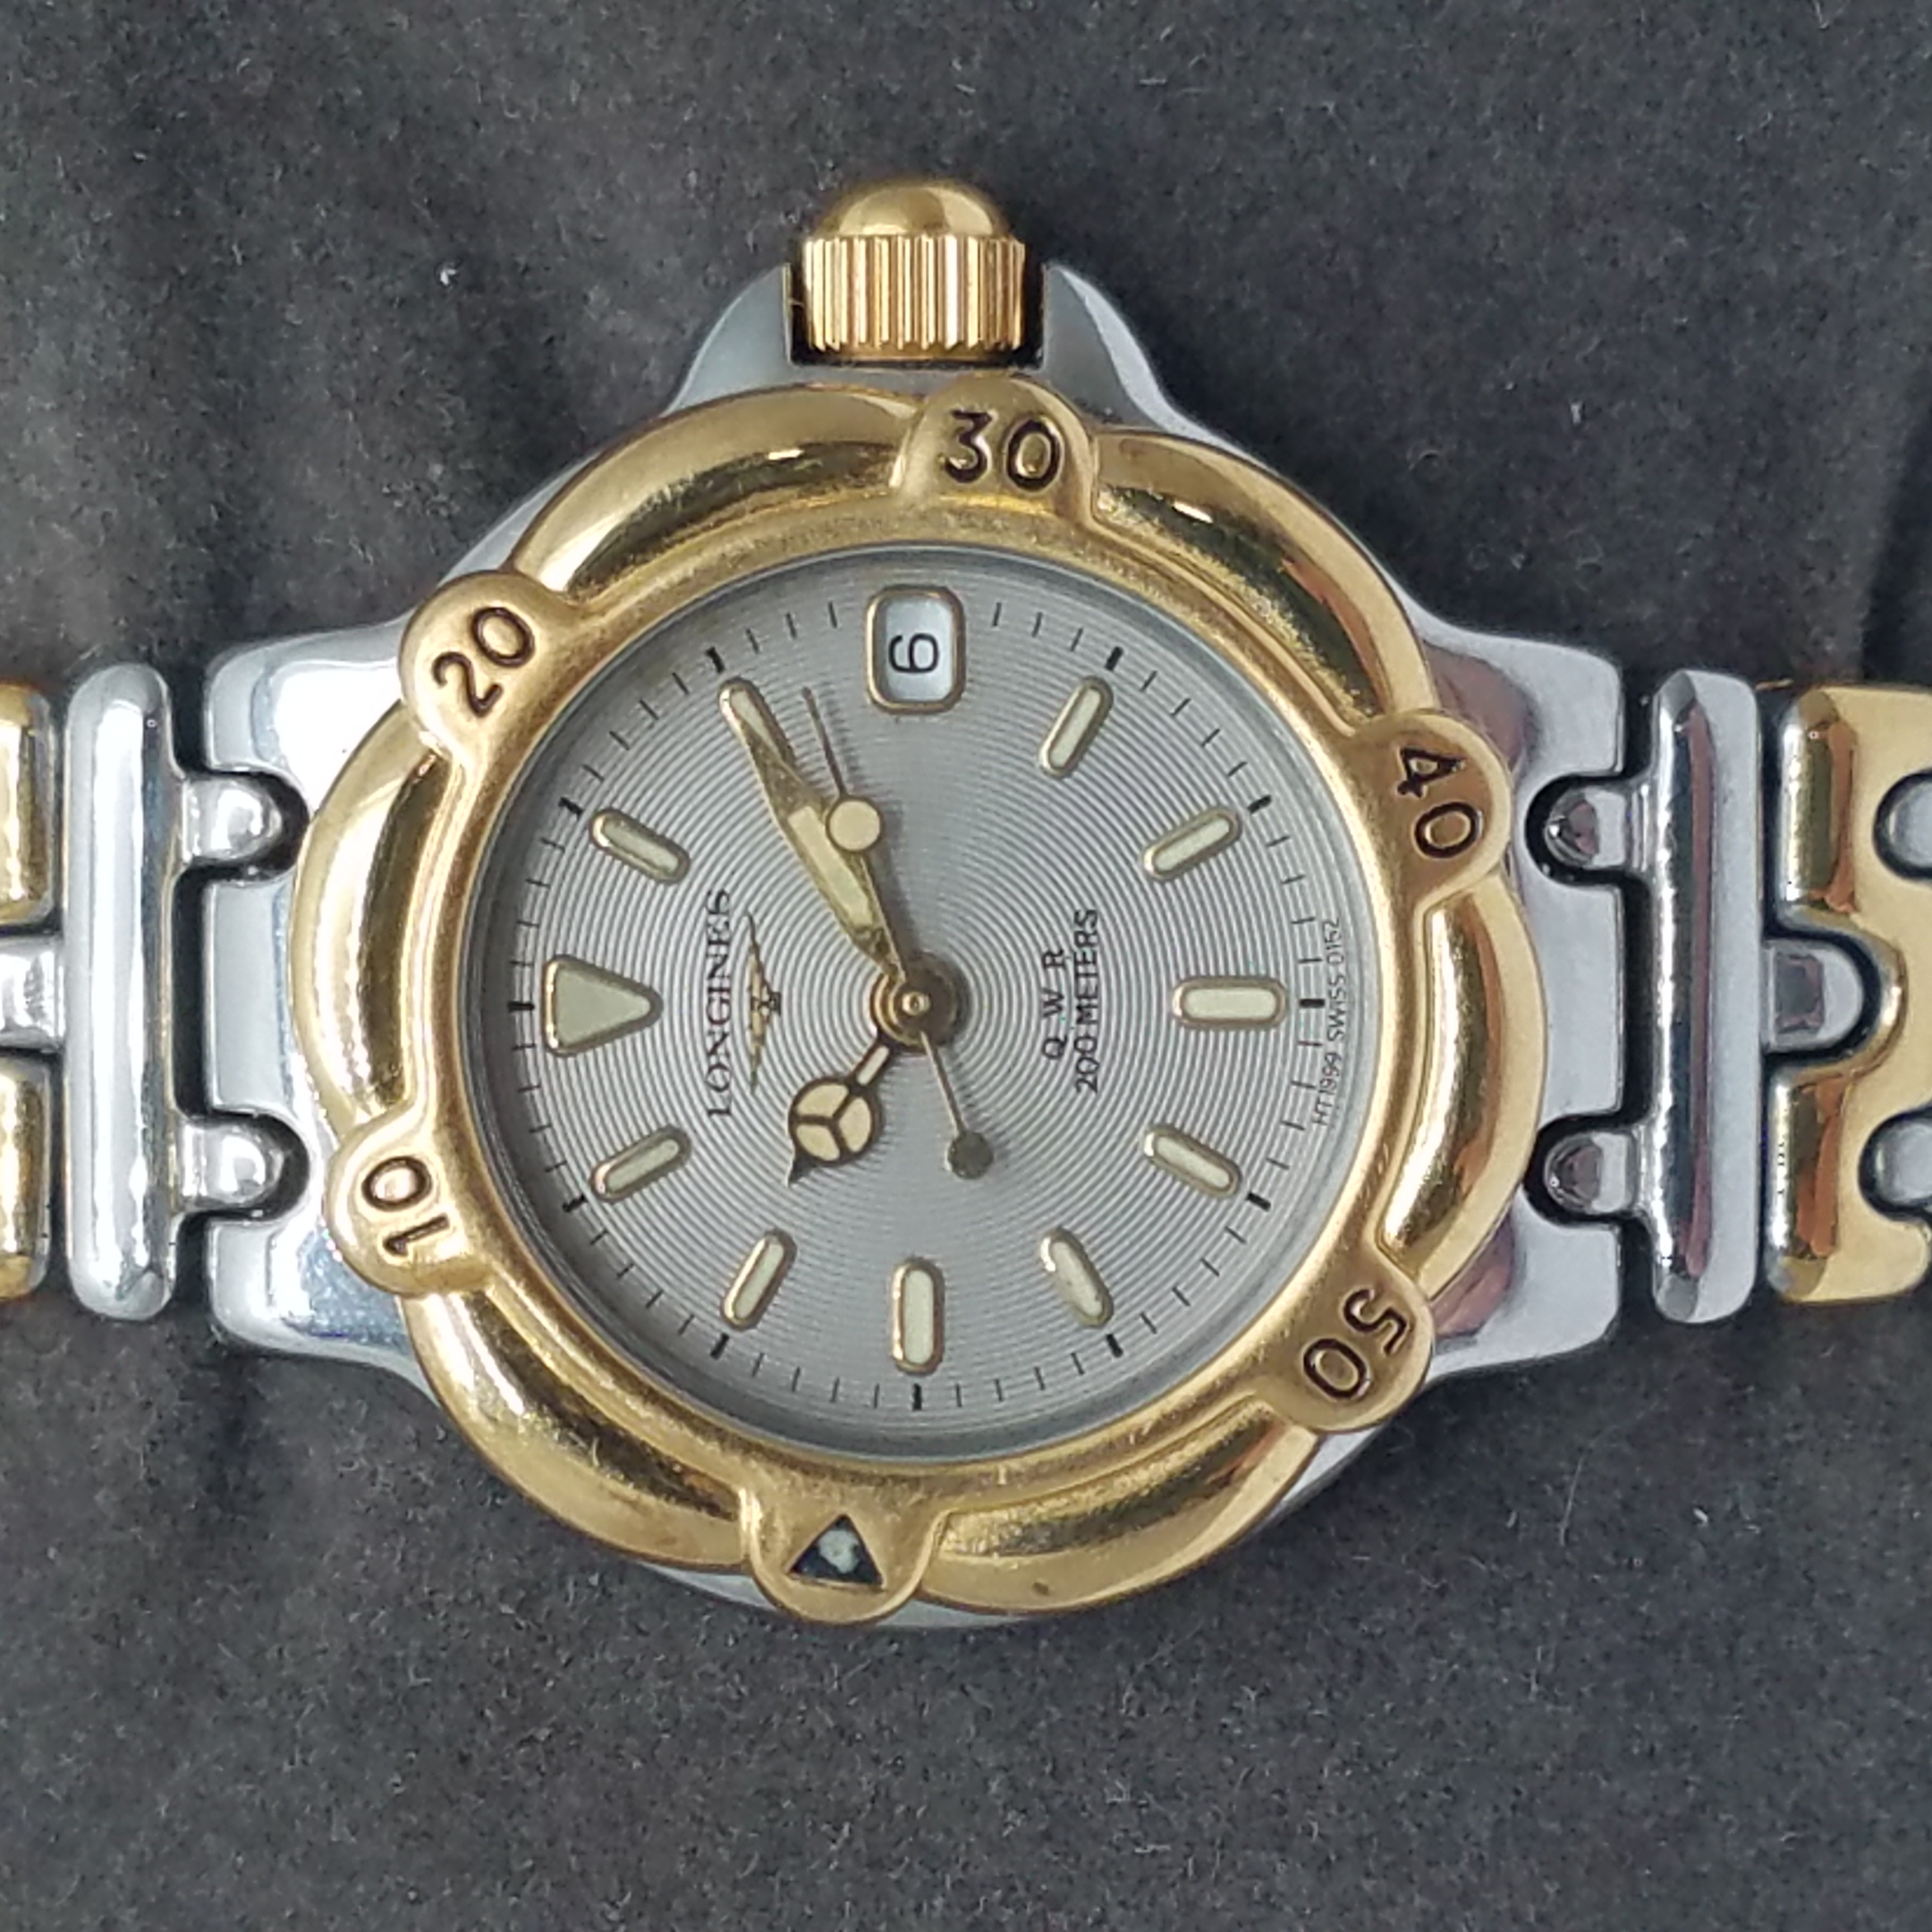 Buy the Longines QWR Diver Gold & Silver Tone 200M WR Watch | GoodwillFinds